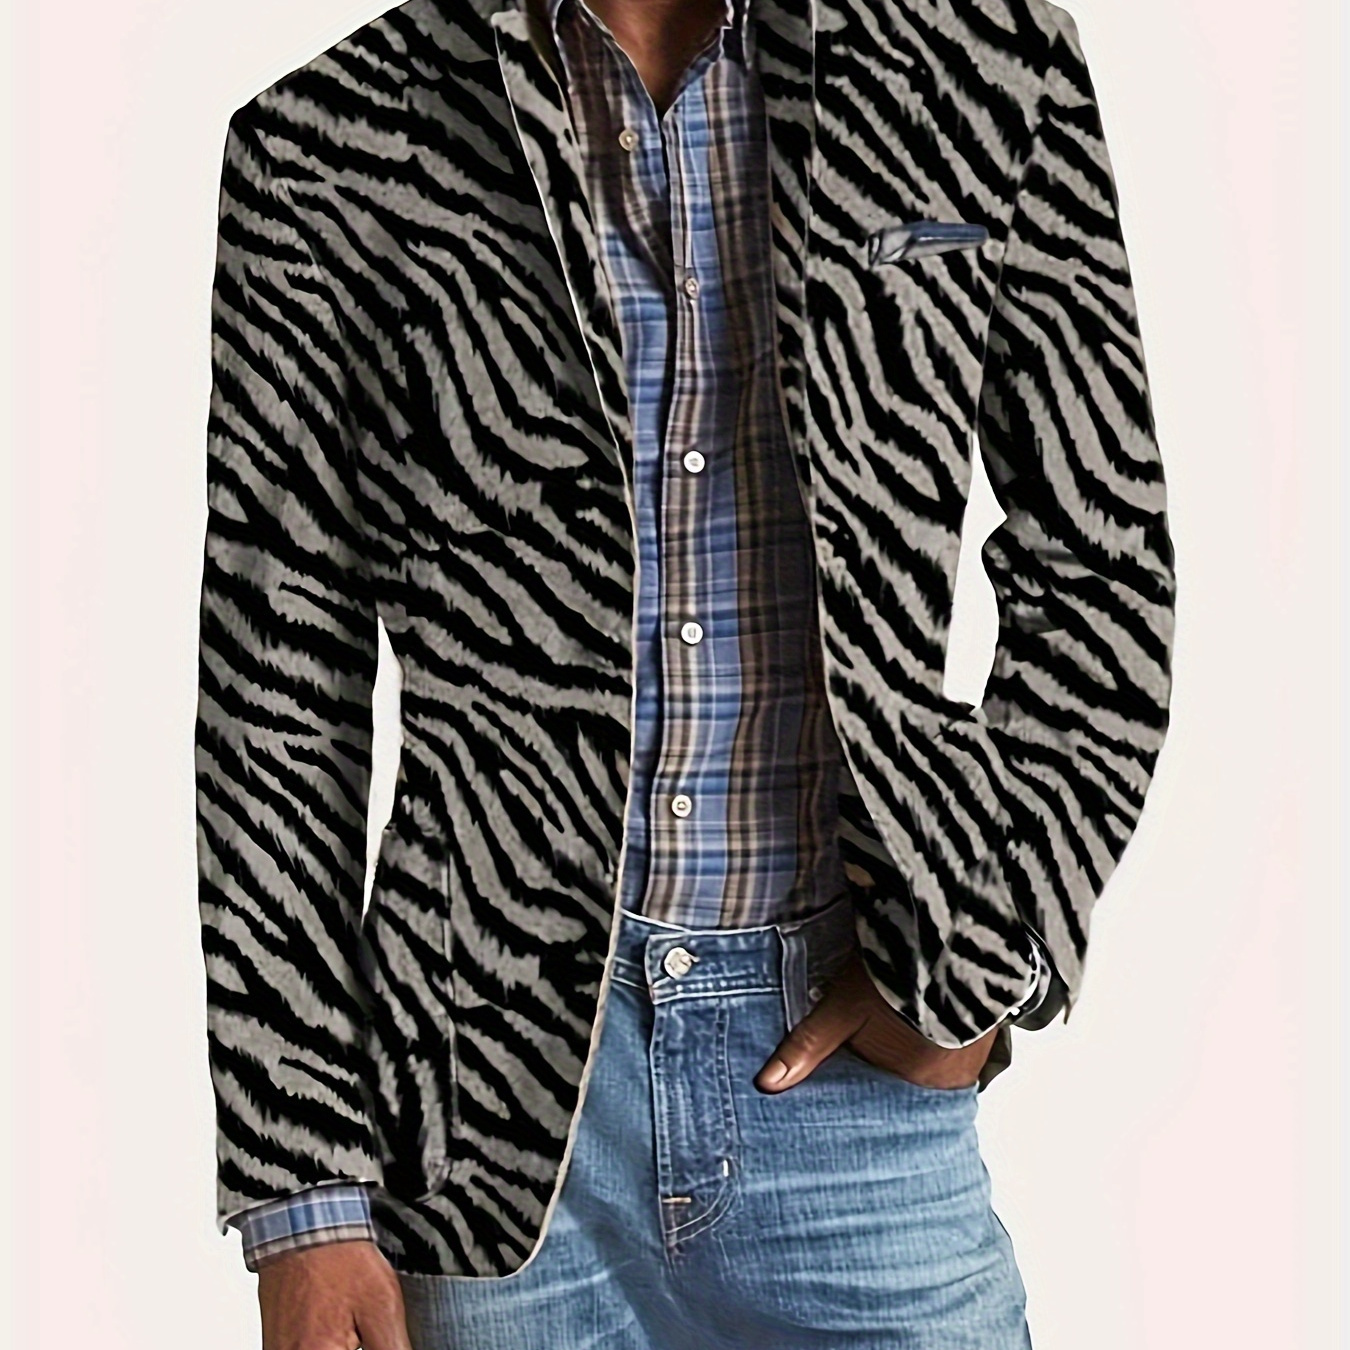 

Men's Casual Blazer With Zebra Print, Lightweight Business Suit Jacket, Fashion Print Coat For Business Casual Style, Old Money Style